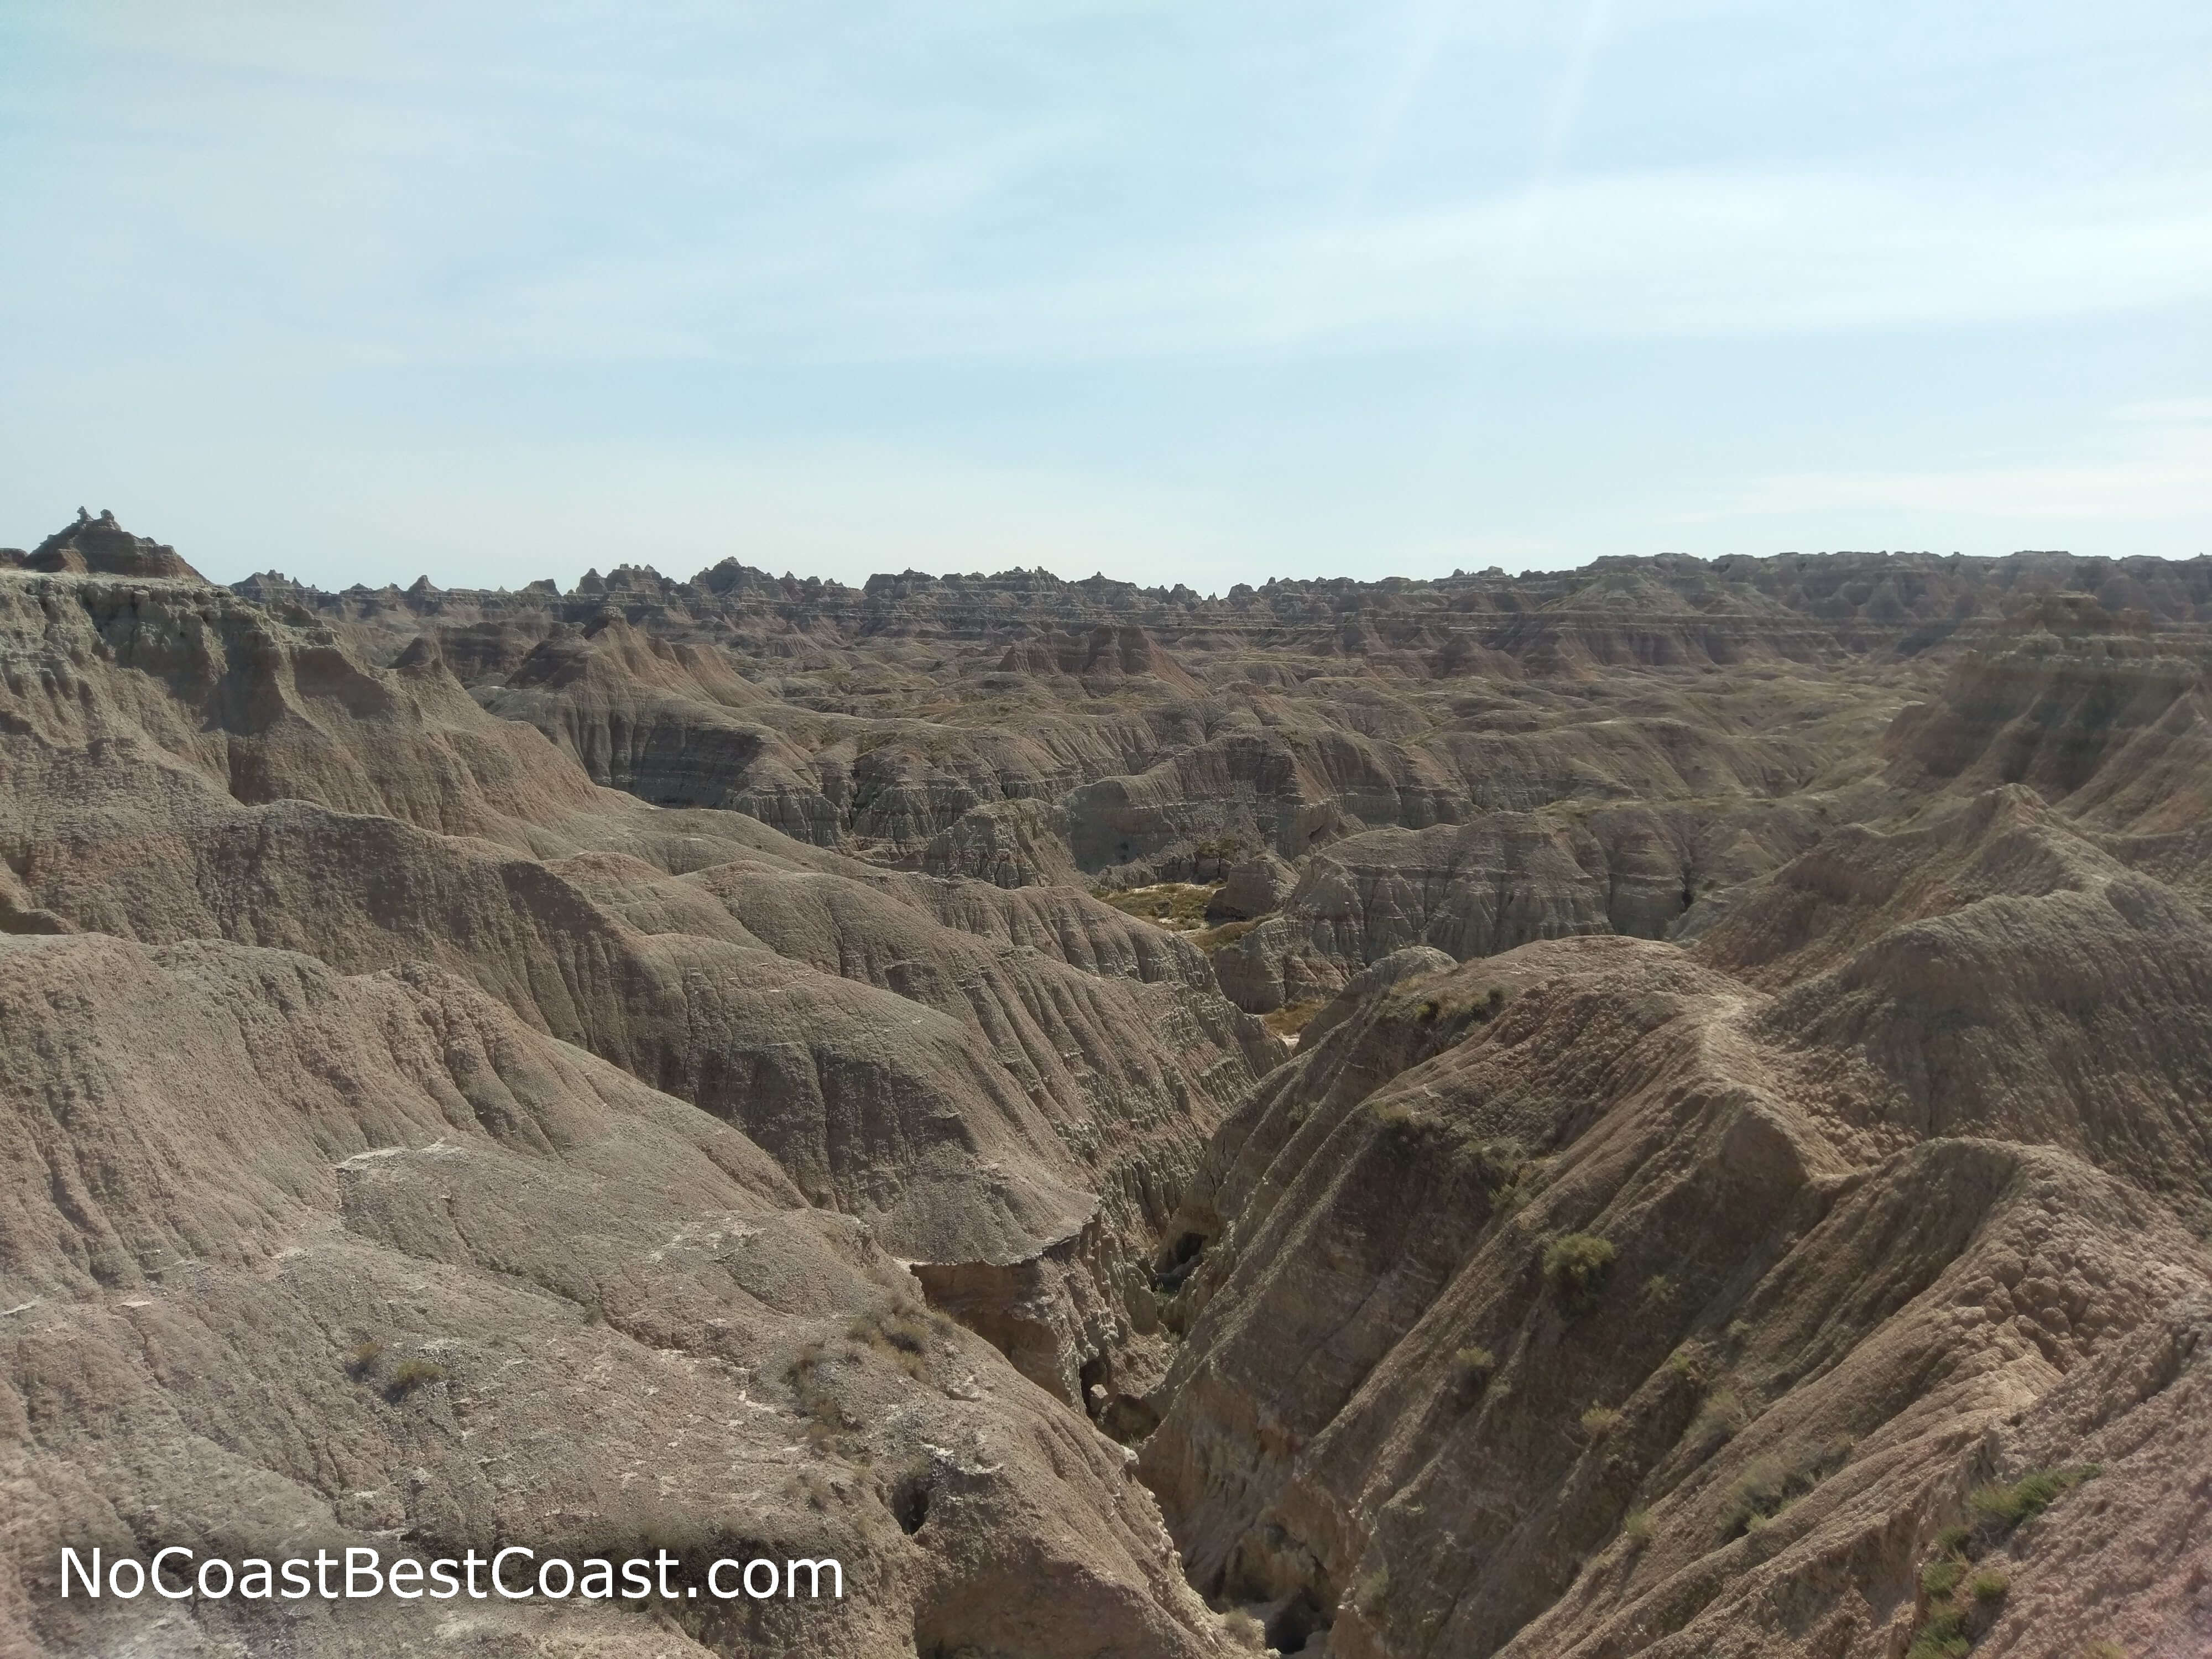 As you stand on top of a badlands formation, you can see down into the water-carved canyons below